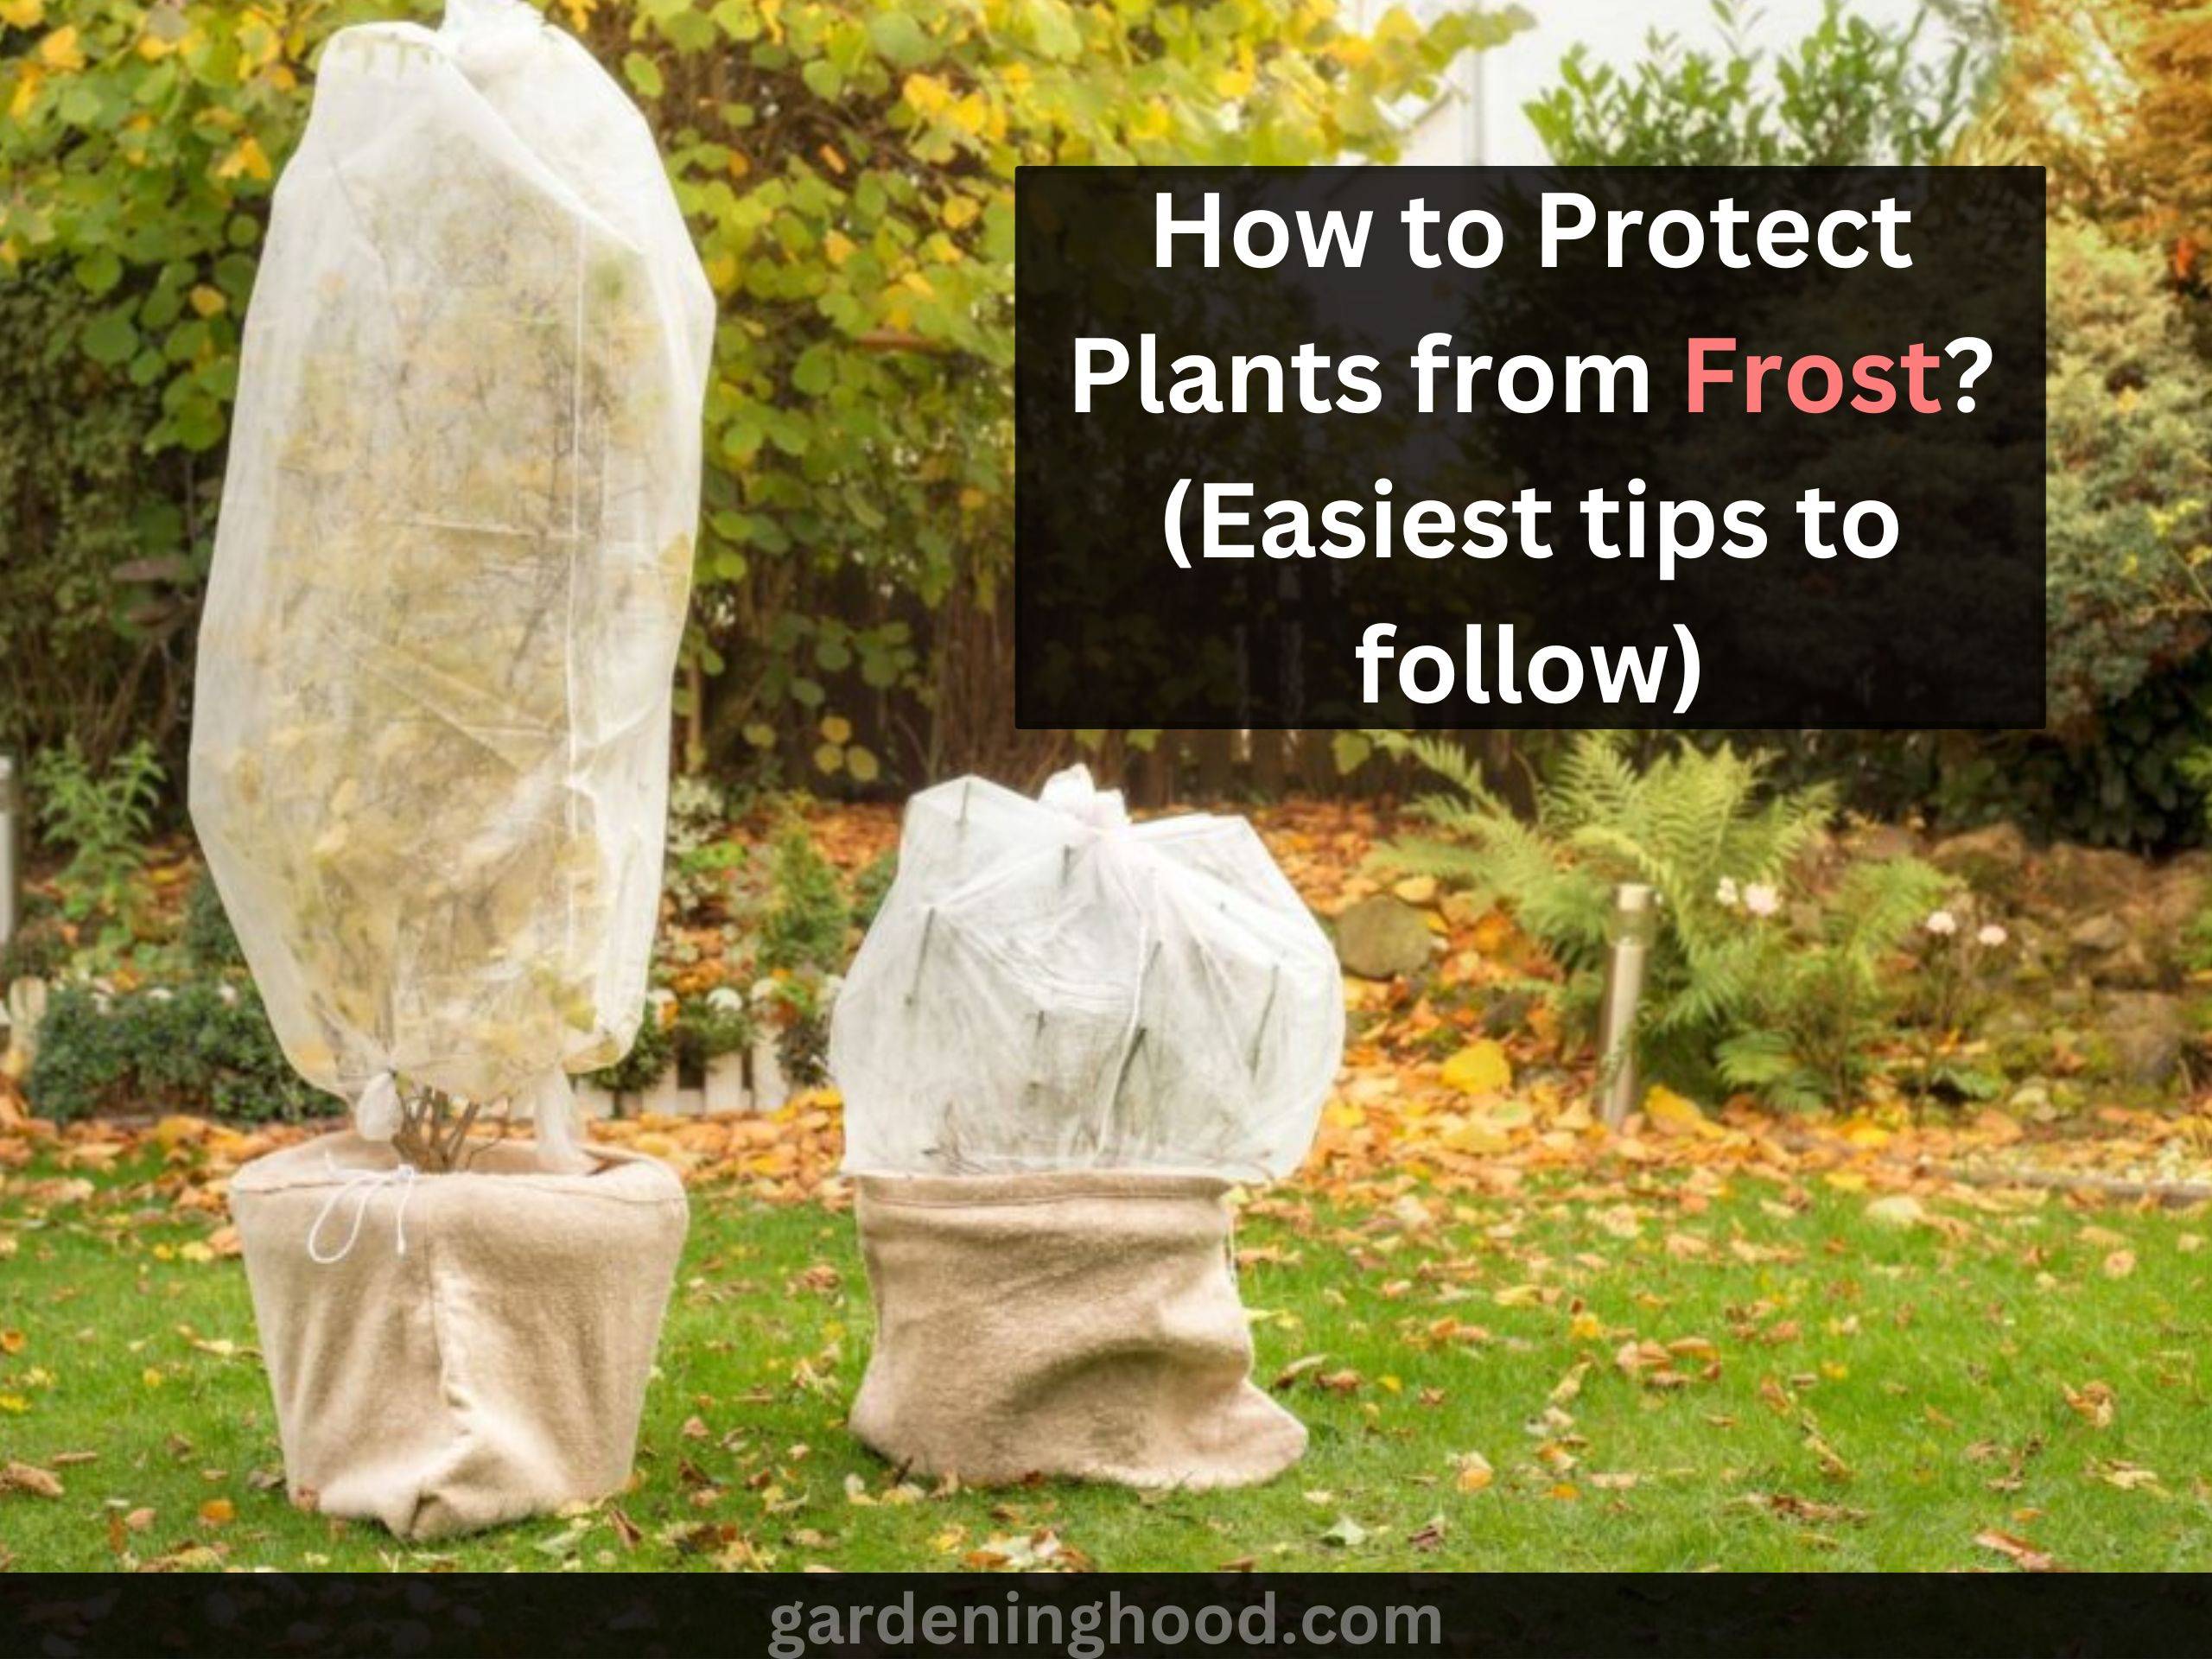 How to Protect Plants from Frost?(Easiest tips to follow)